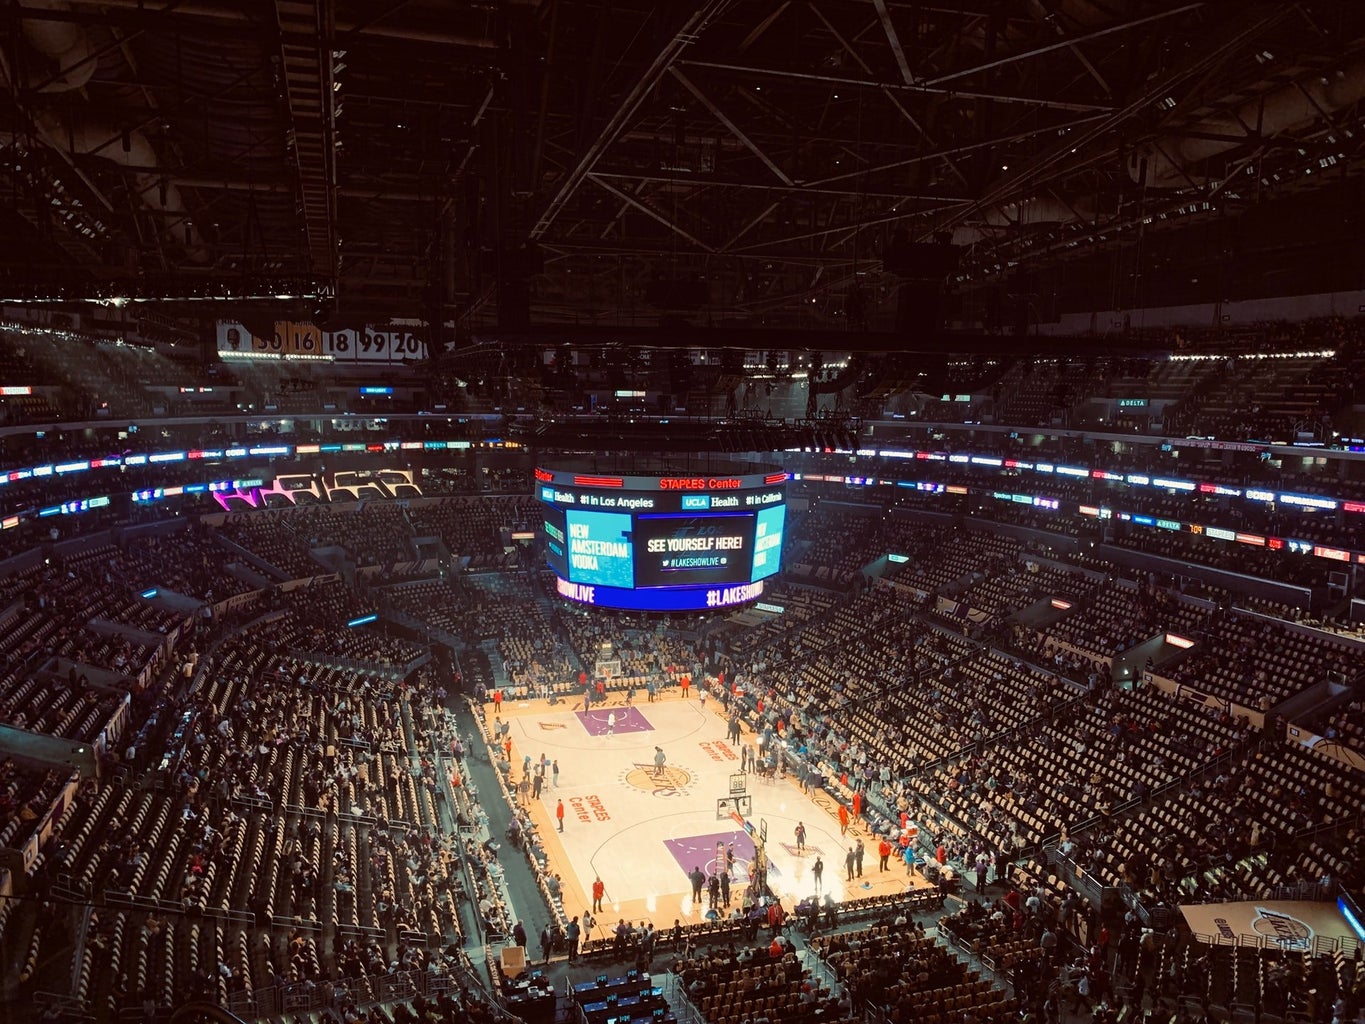 top view of the Lakers basketball court during a game.